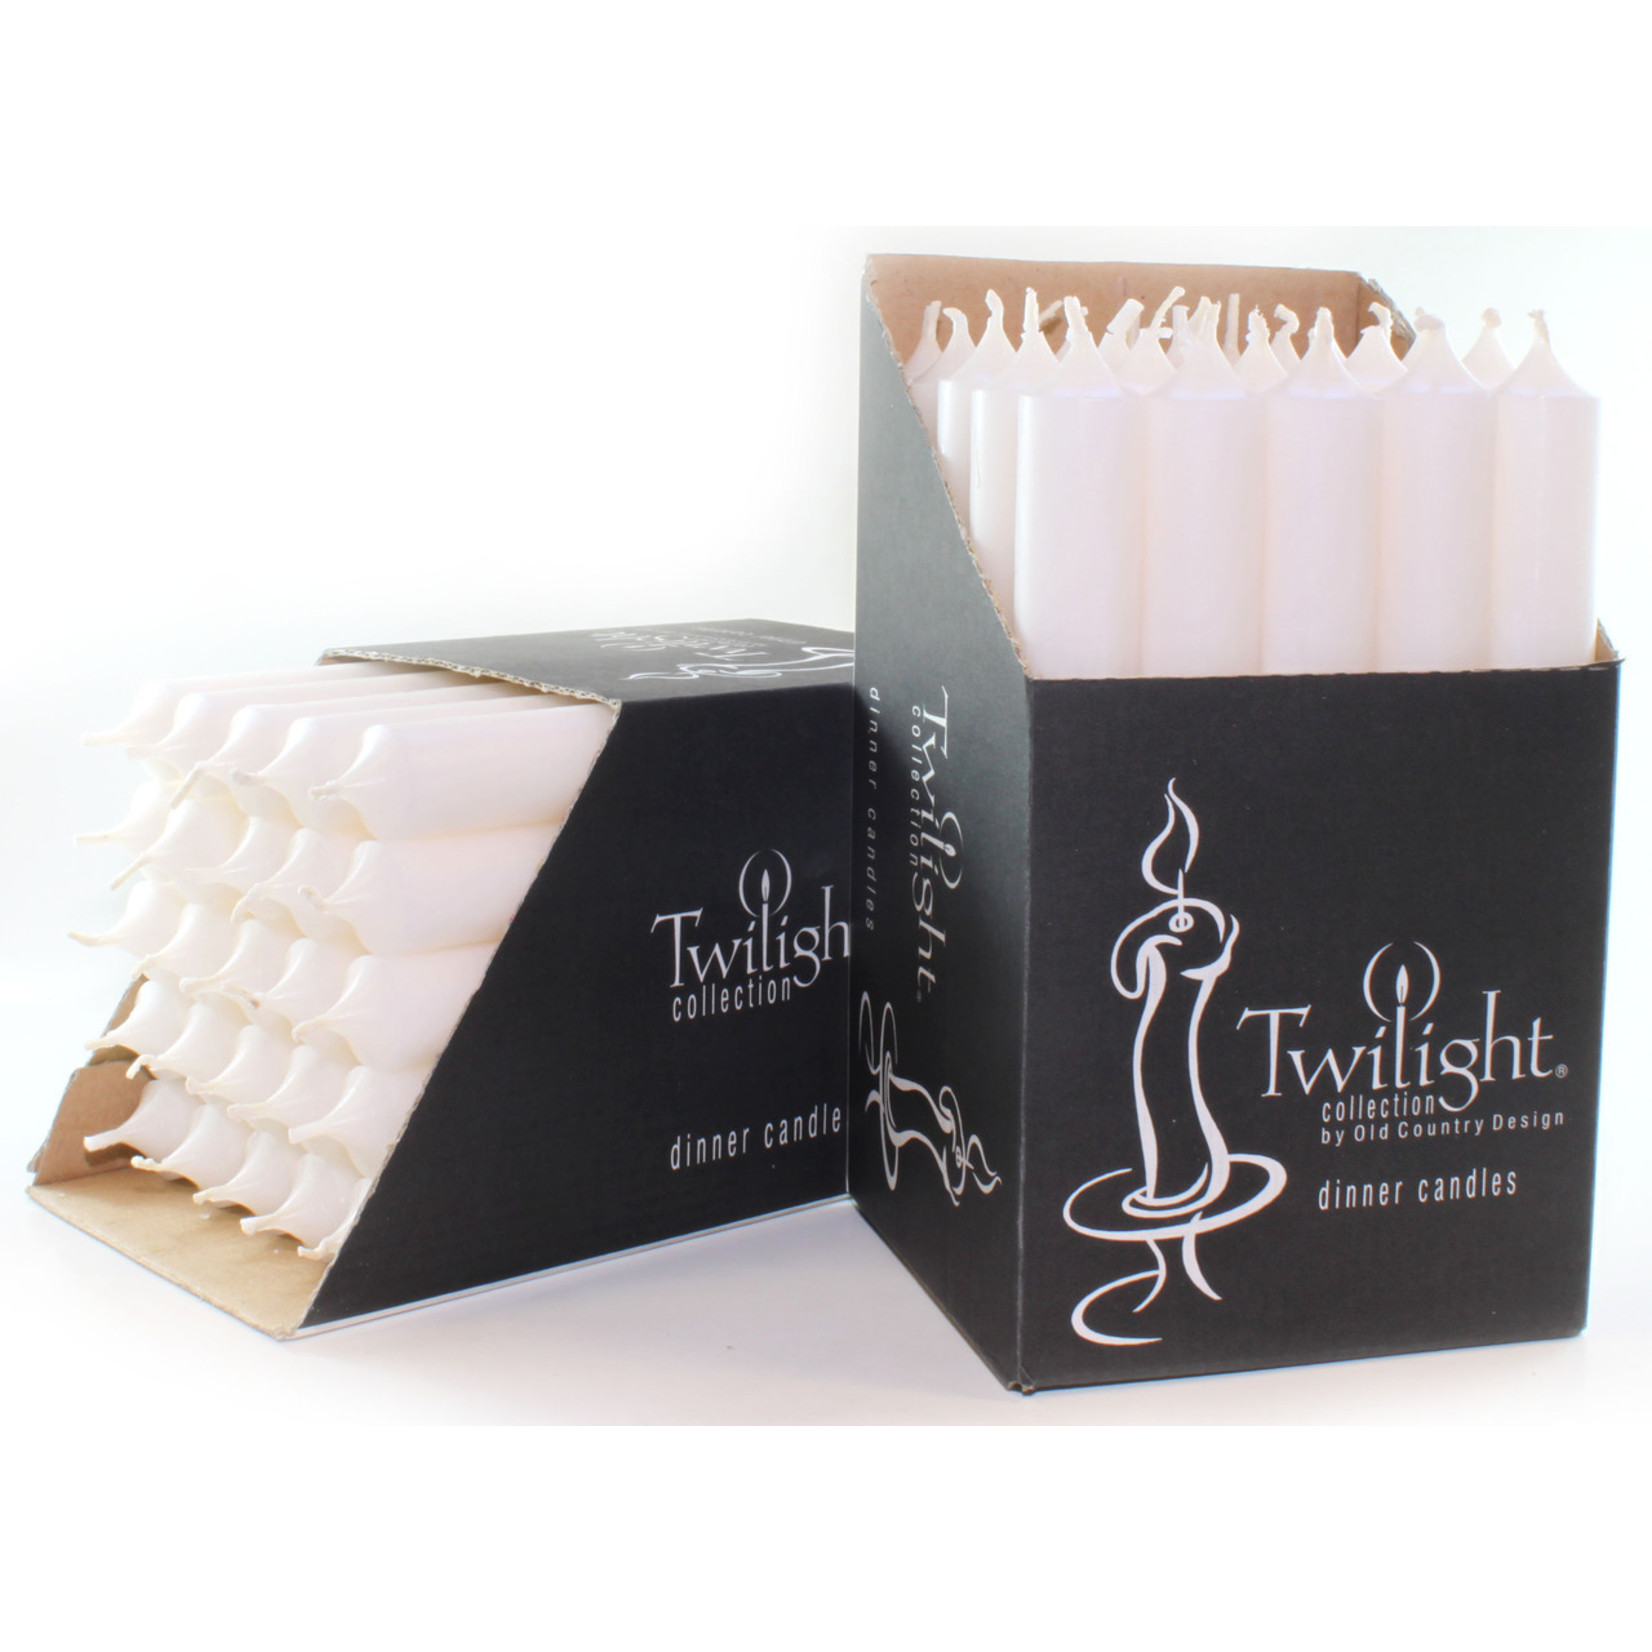 Twilight Collection Dinner Candle - White